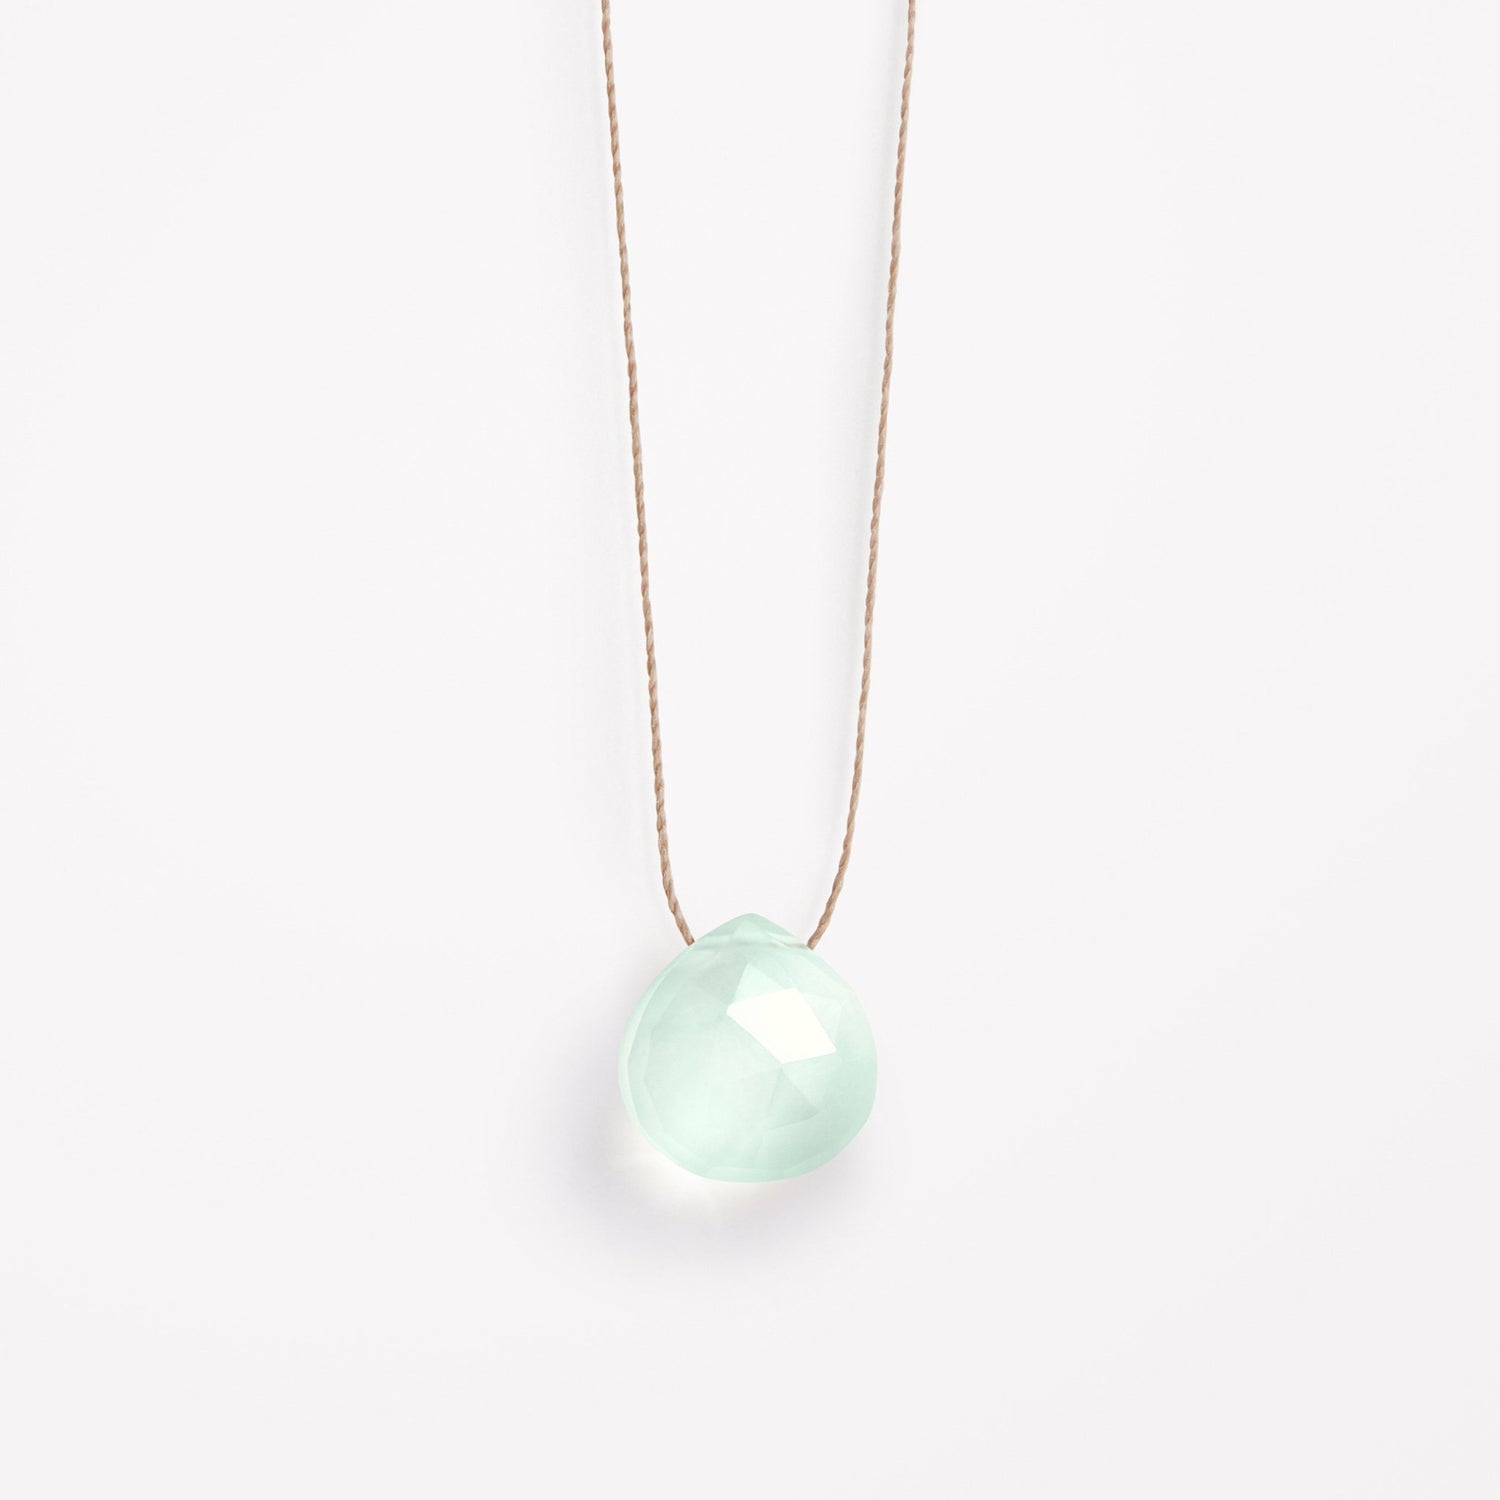 Wanderlust Life Fine Cord Necklace - Chalcedony - Seaglass Wanderlust Life The White Room